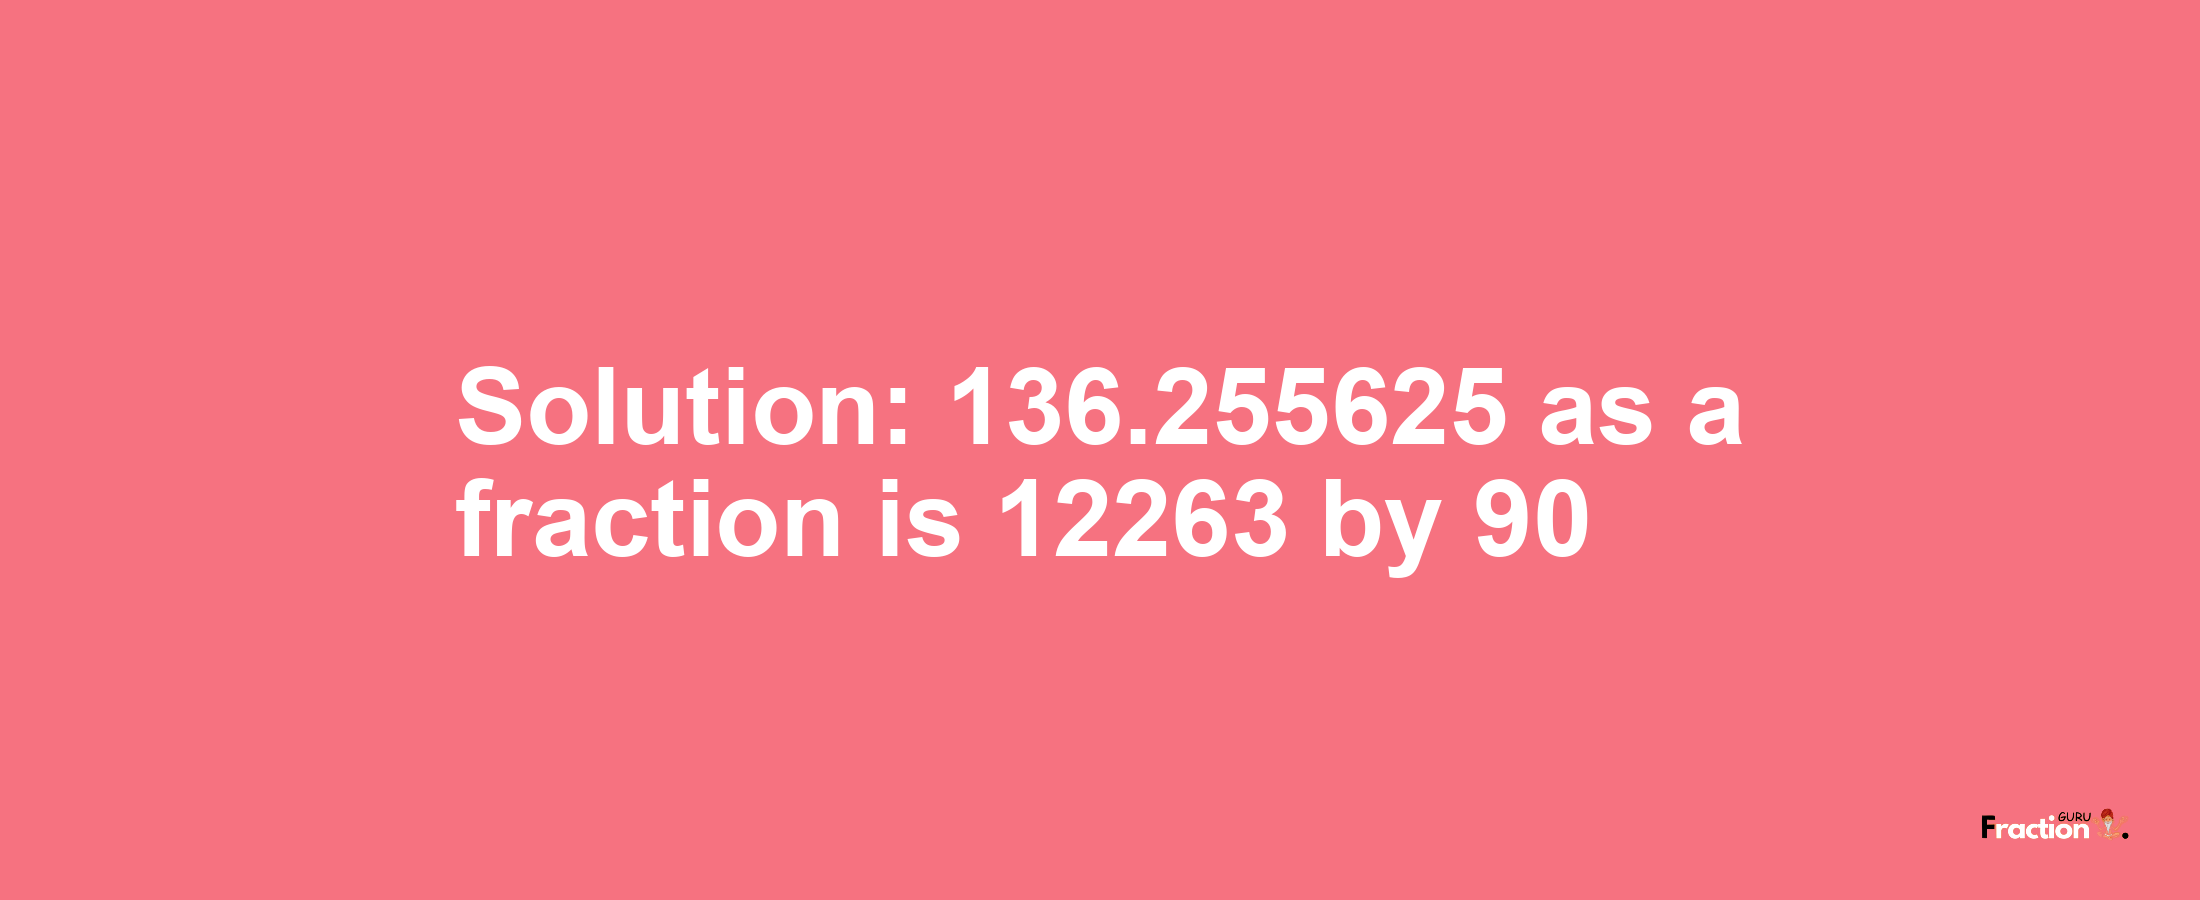 Solution:136.255625 as a fraction is 12263/90